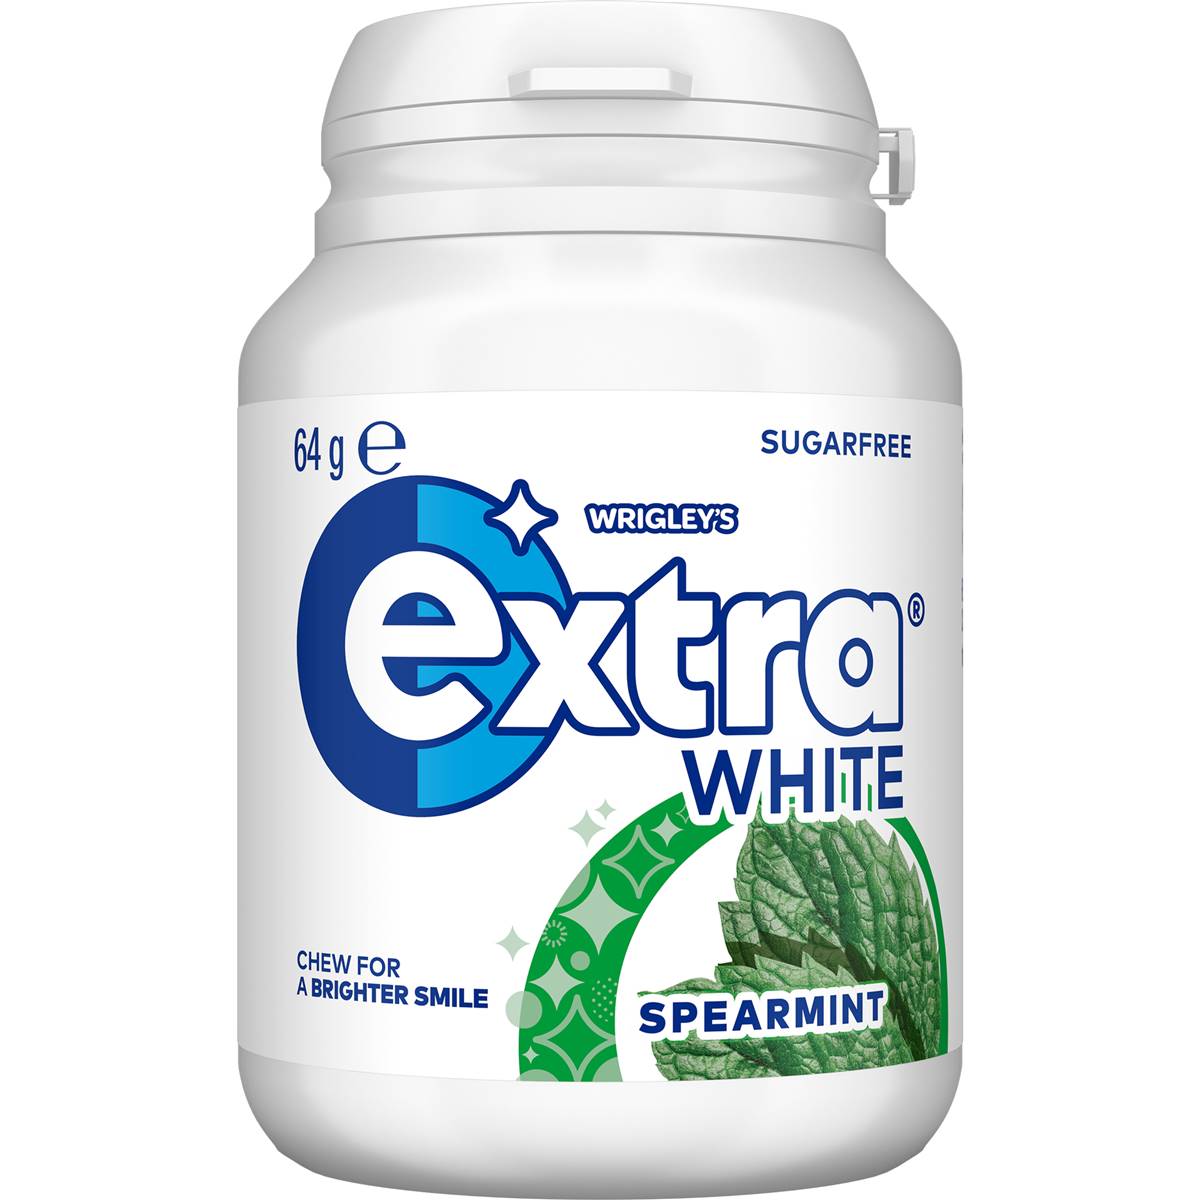 Calories in Wrigley's Extra White Spearmint Chewing Gum Sugar Free Bottle